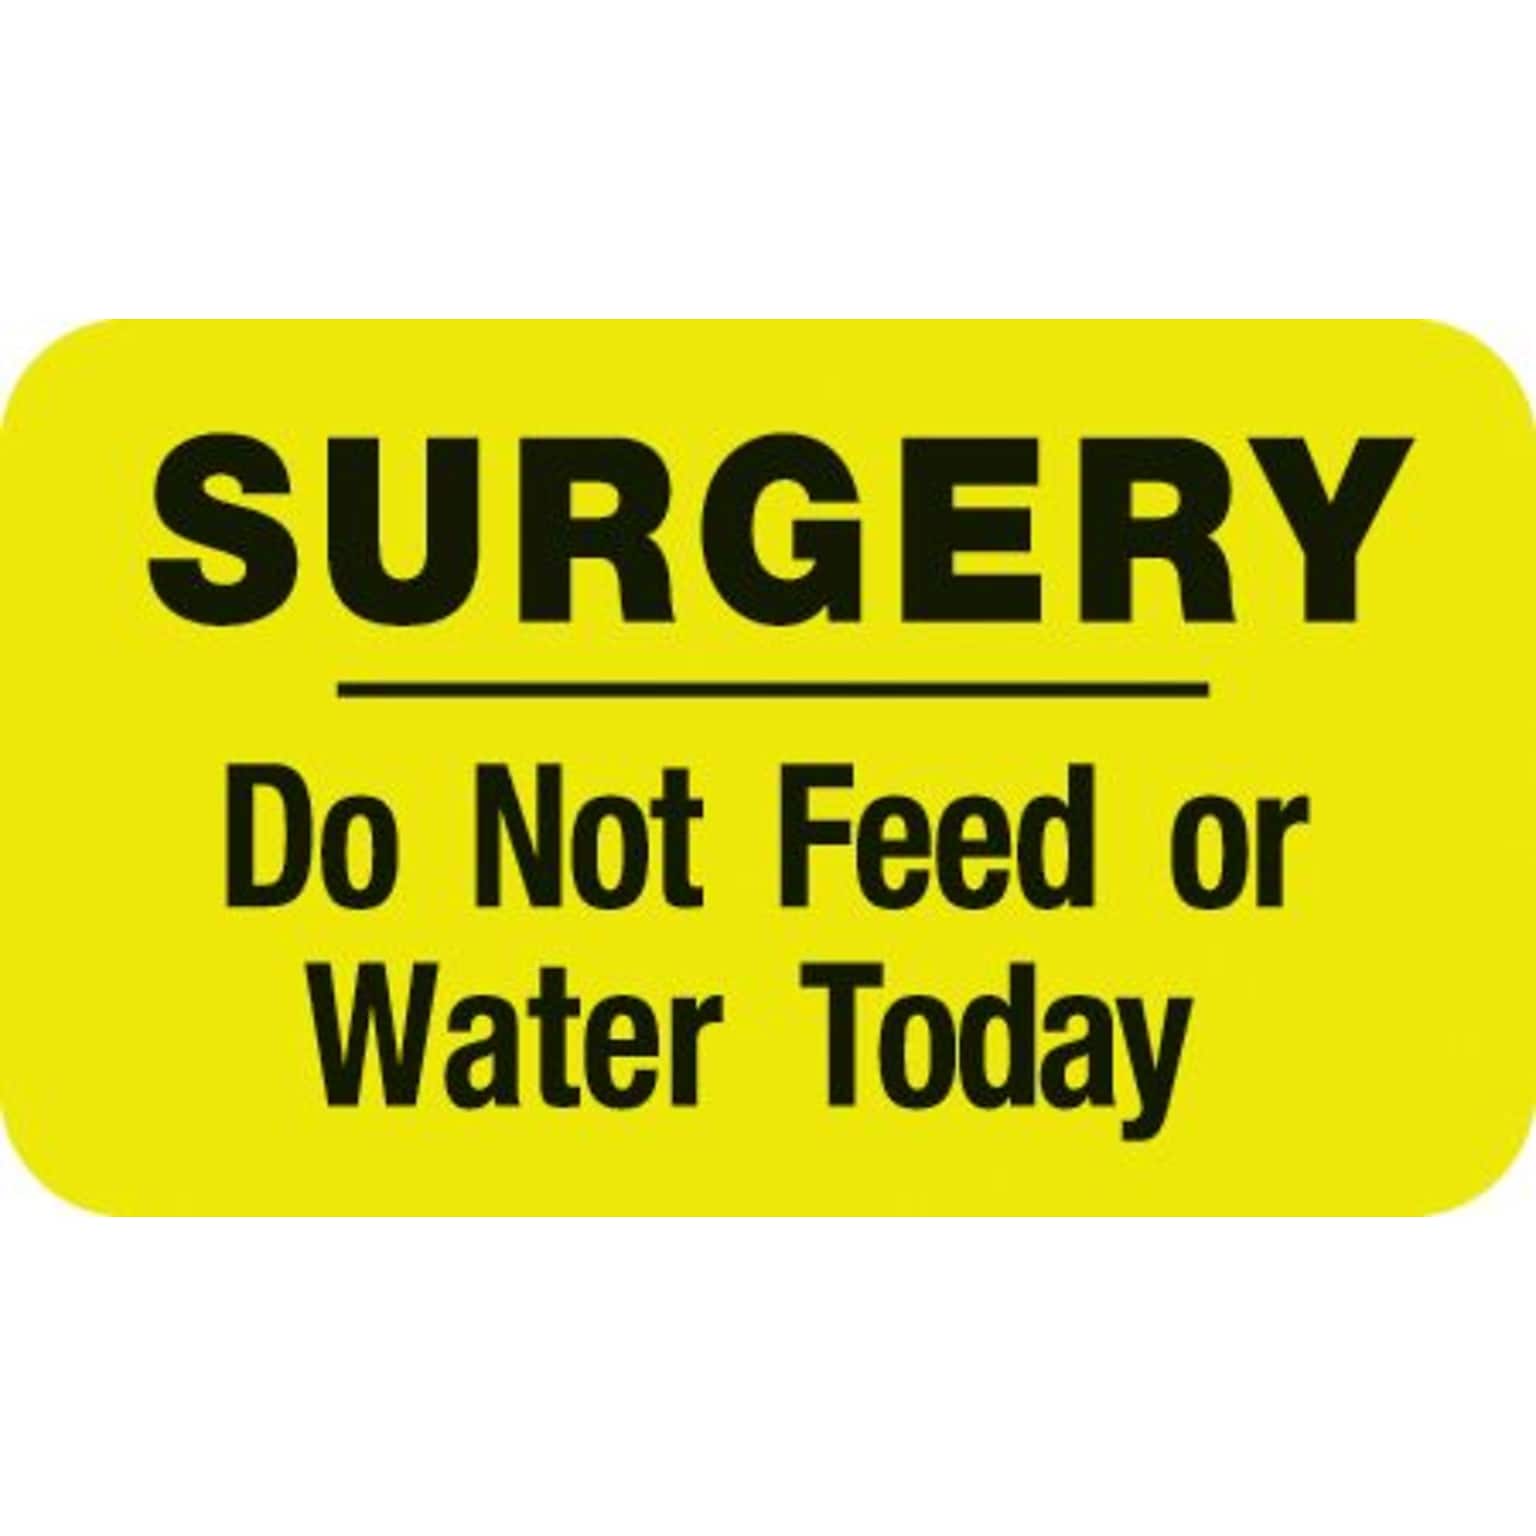 Medical Arts Press® Diet and Medical Alert Labels, Surgery - Do Not Feed or Water, Fl Chartreuse, 7/8x1-1/2, 500 Labels